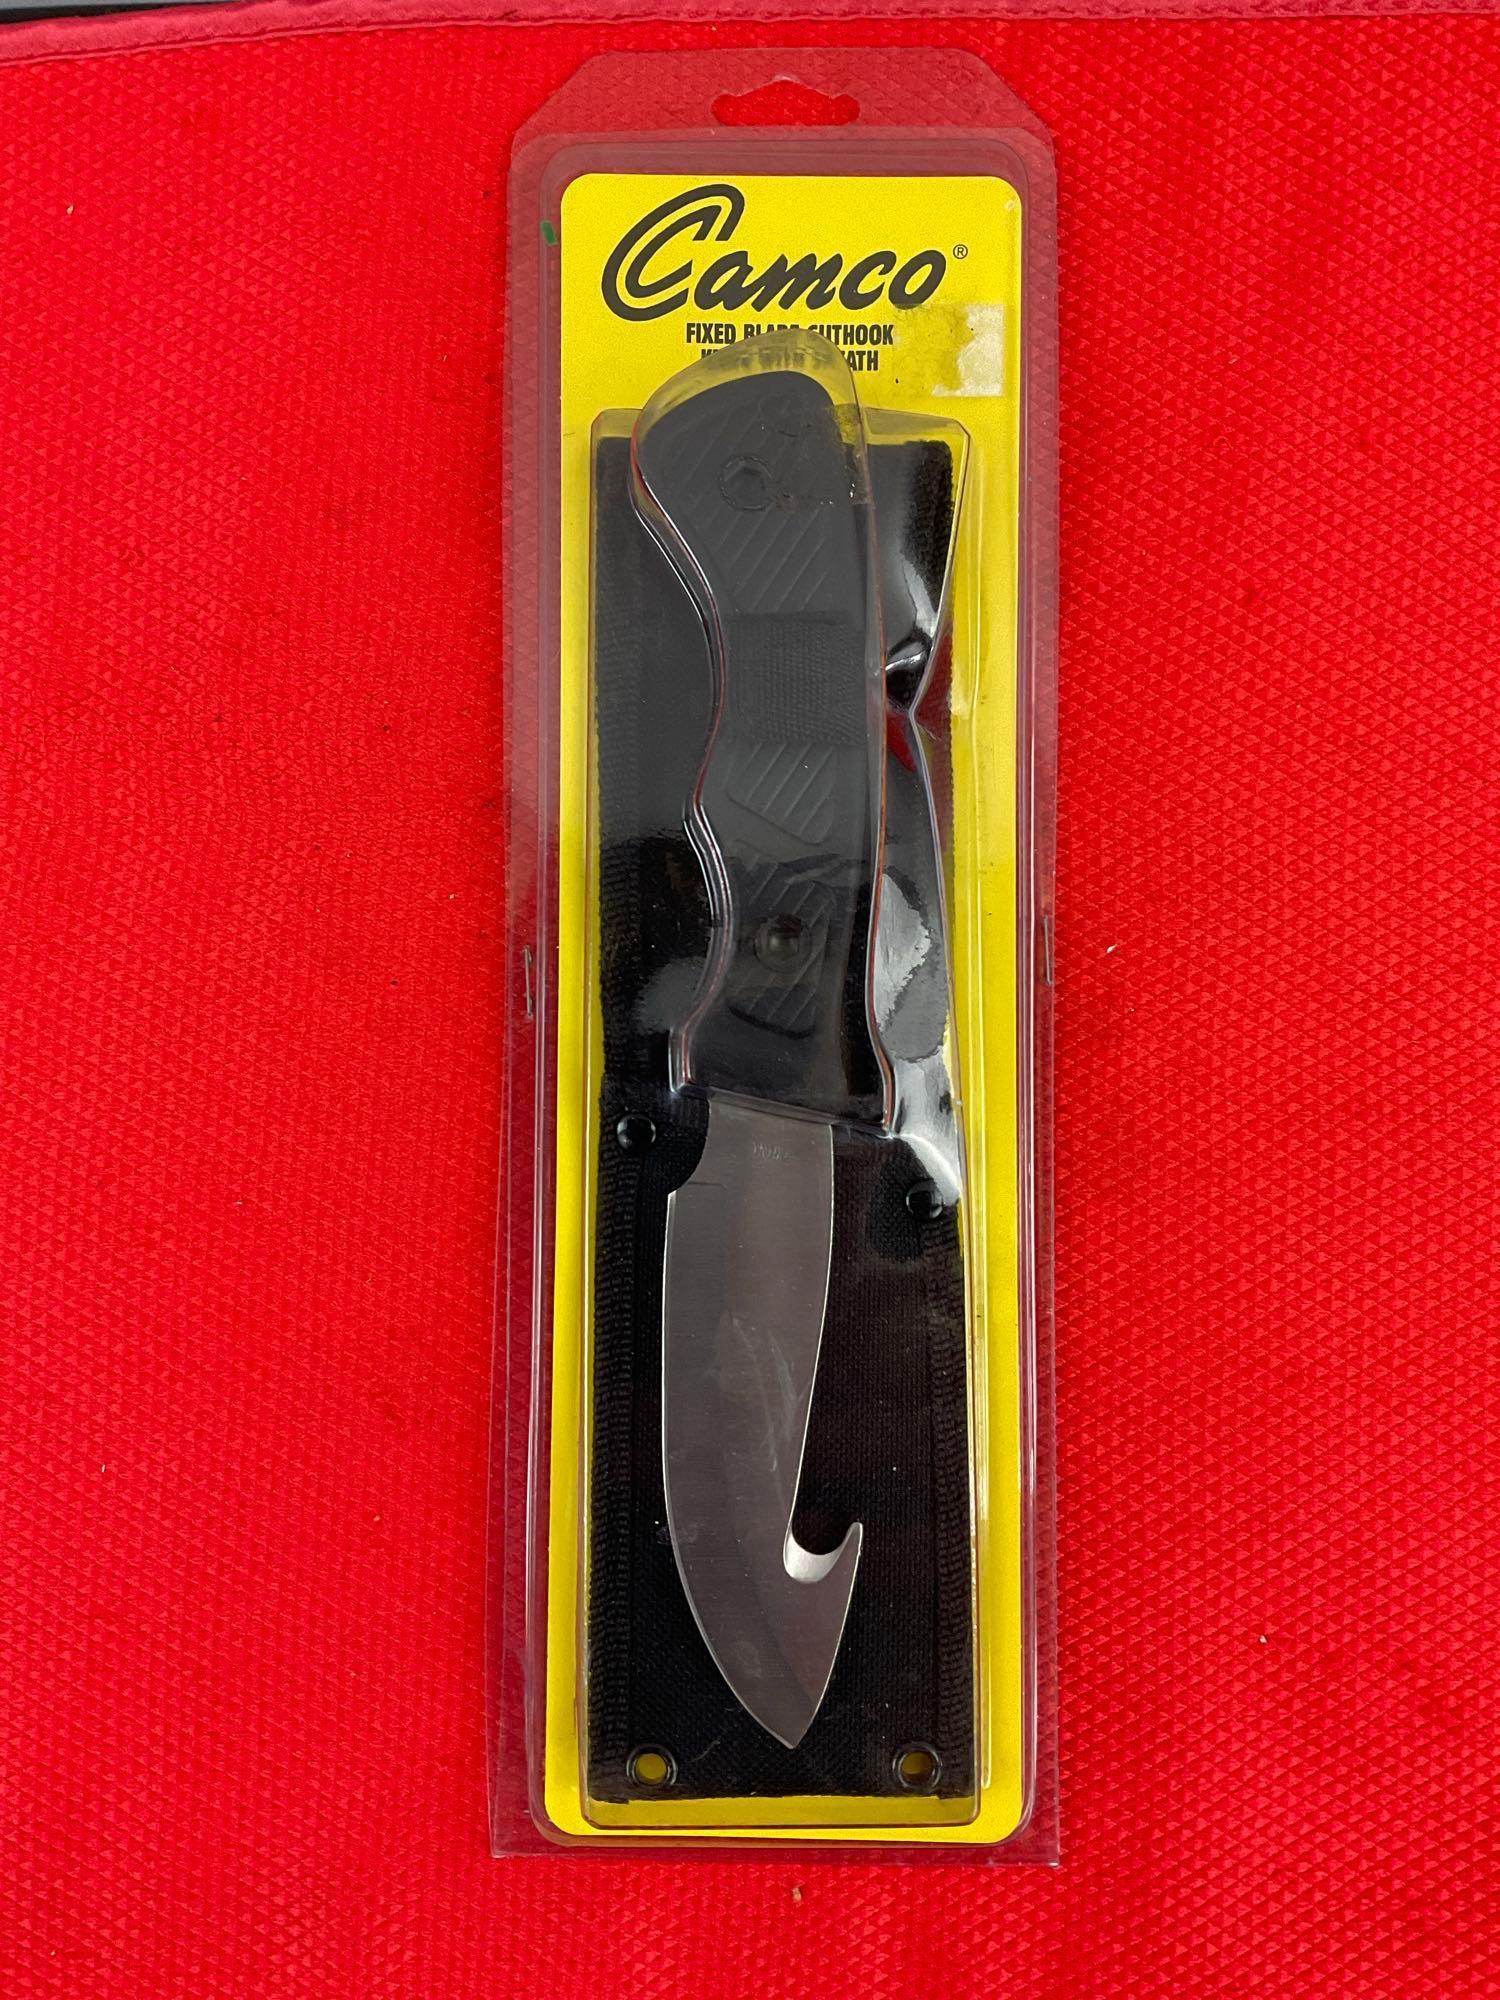 4 pcs Vintage Steel Knives, 3x Coast Cutlery Folding Knives & 1 Camco Fixed Blade CAM18. NIB. See